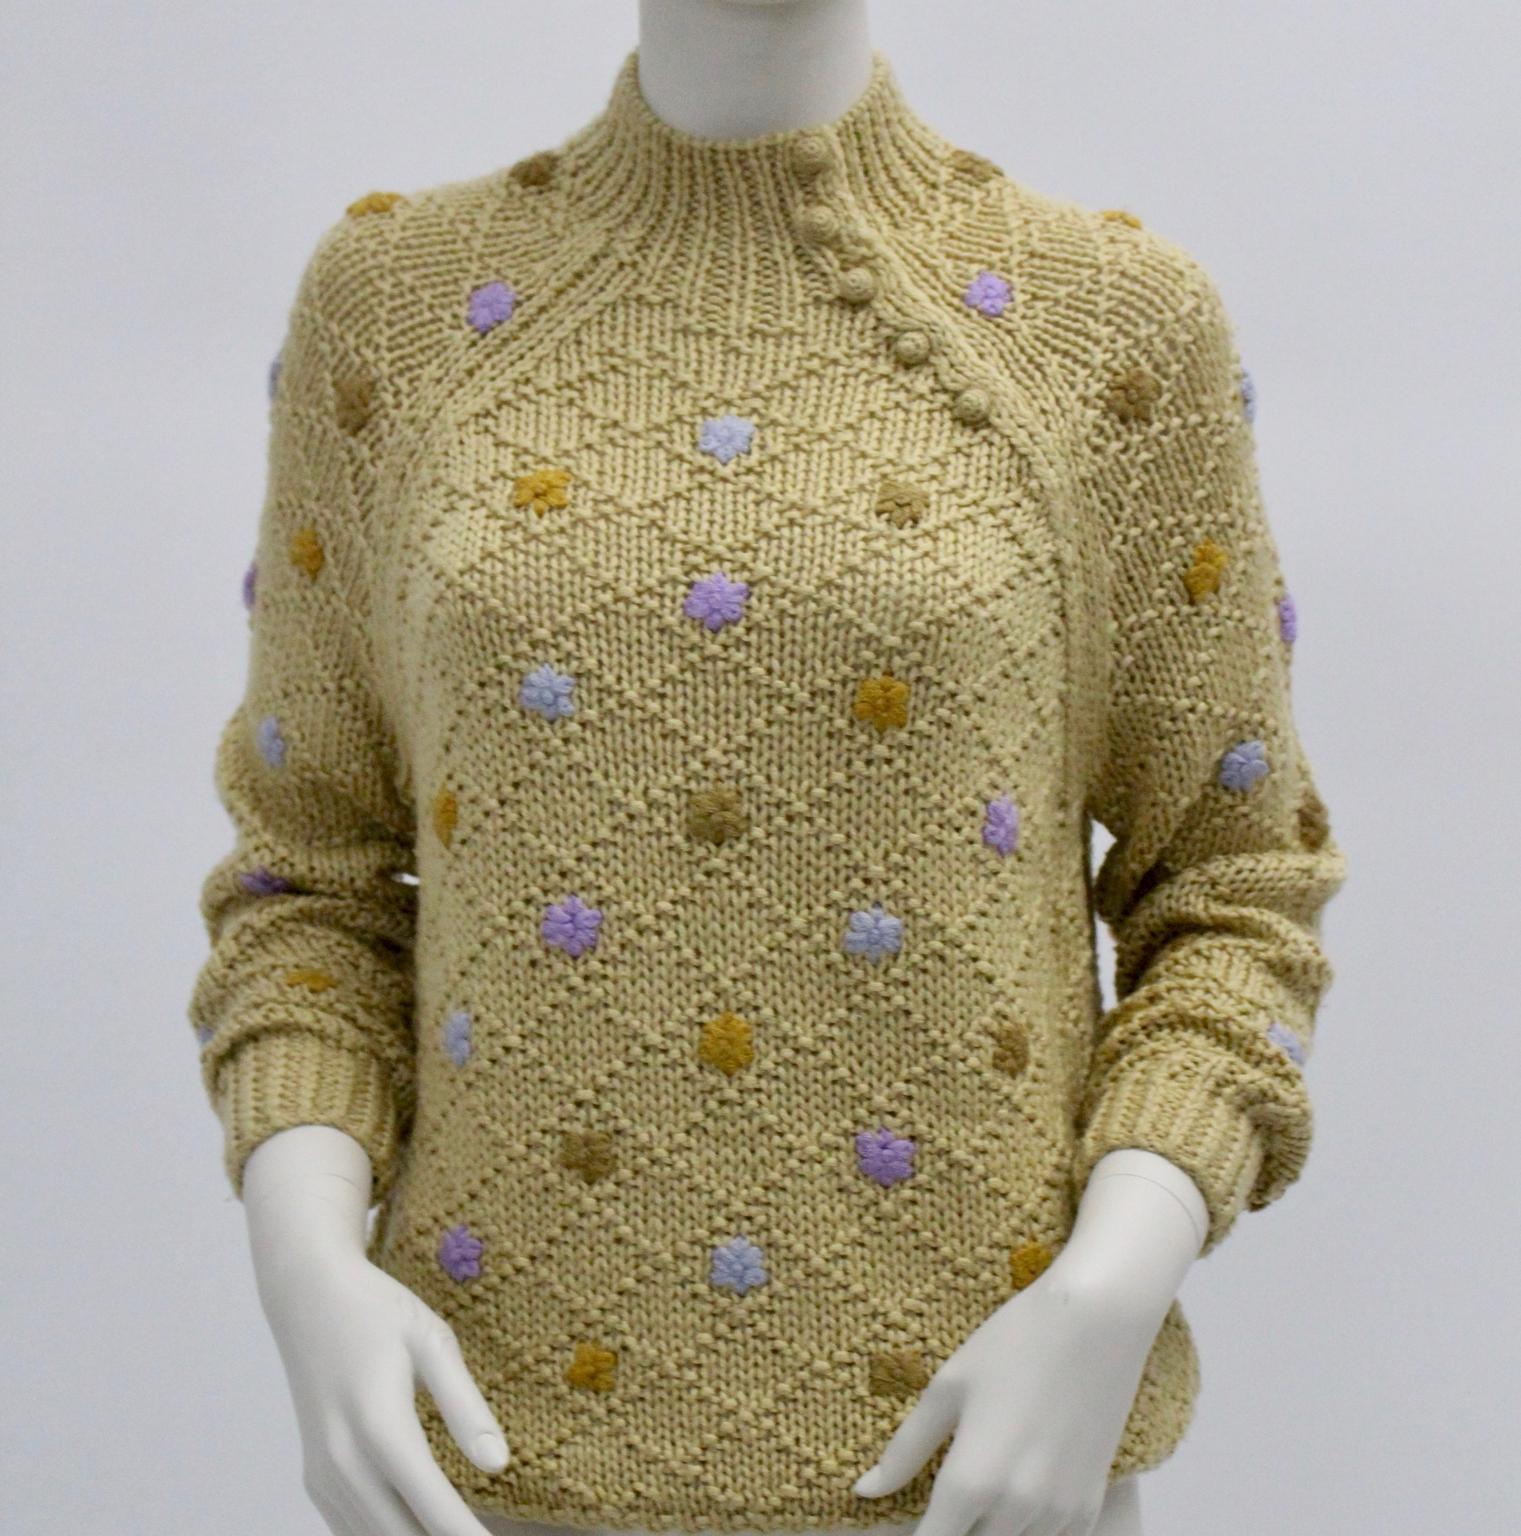 This knitwear sweater by Oscar de la Renta Sport was made of brown knit with rhombs and decorated with stitched flowers in the colors brown, lilac and light-blue.
At the collar are 5 buttons for closure.
Also shows this sweater raglan sleeves.
The